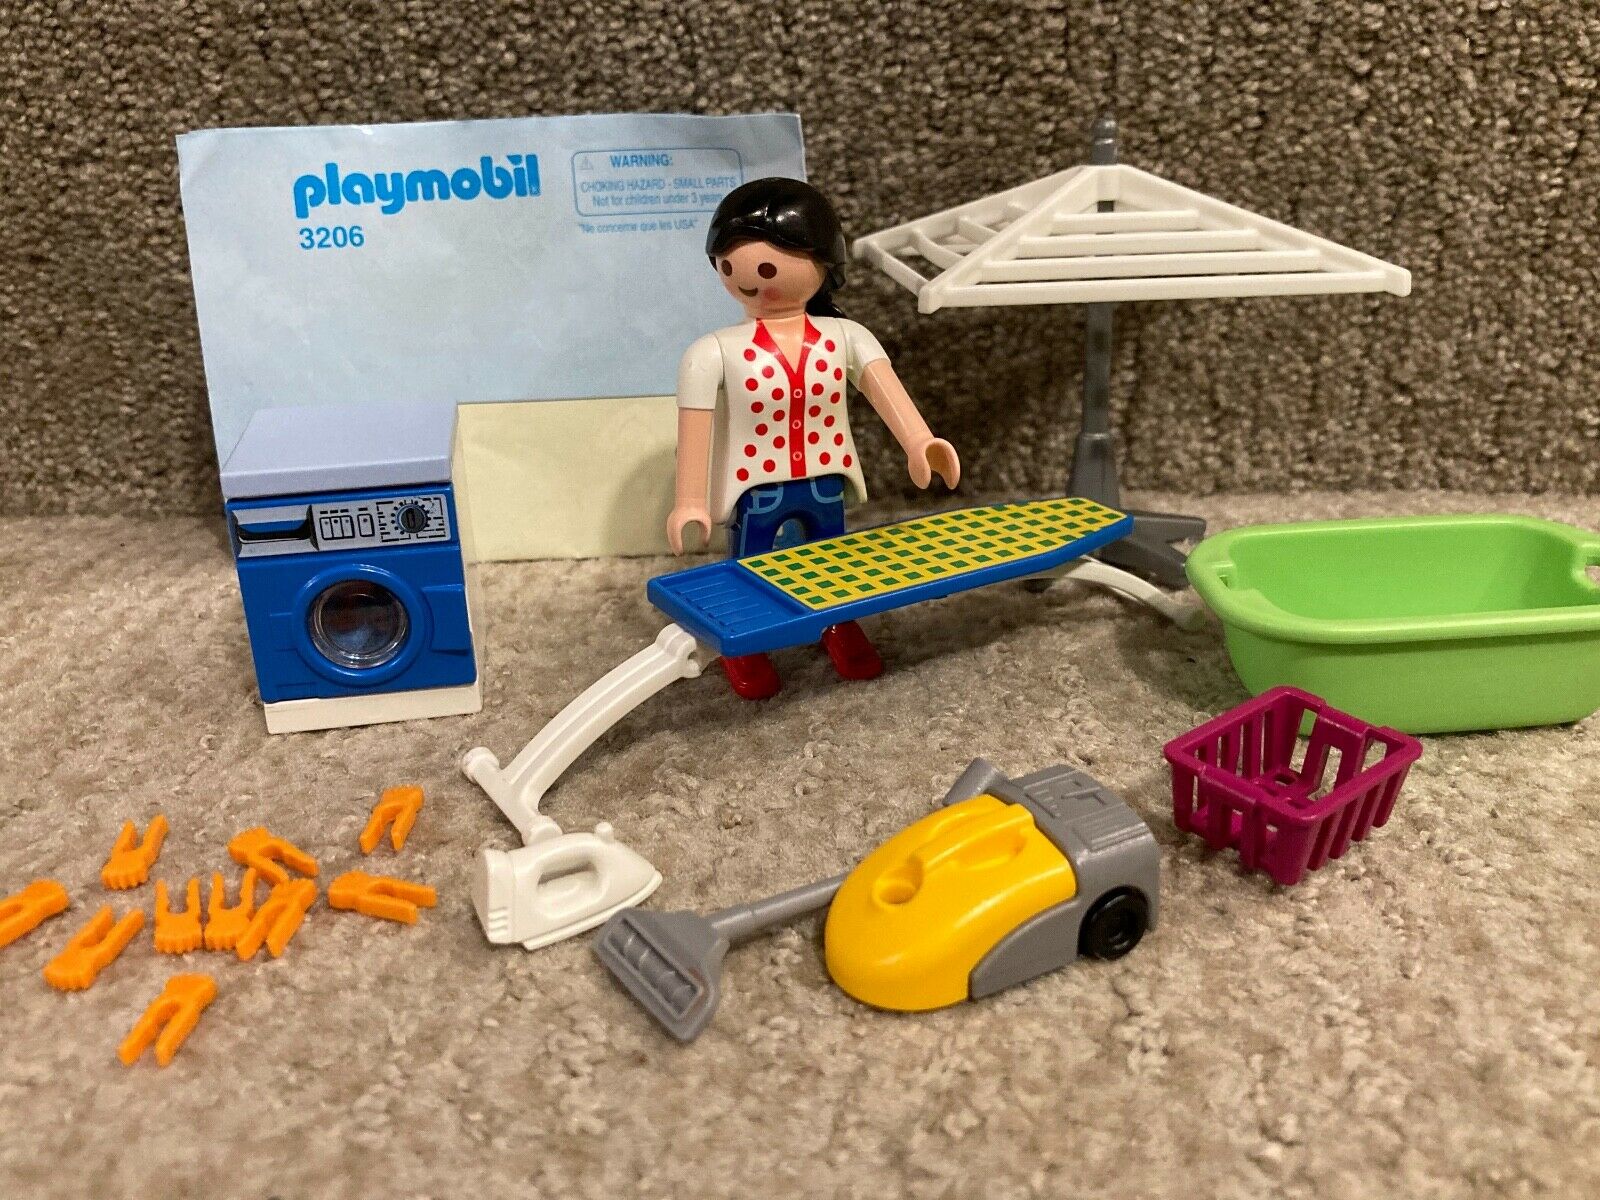 Playmobil 3206 Laundry Room & Vacuum Cleaner Washing Machine For Any Dollhouse